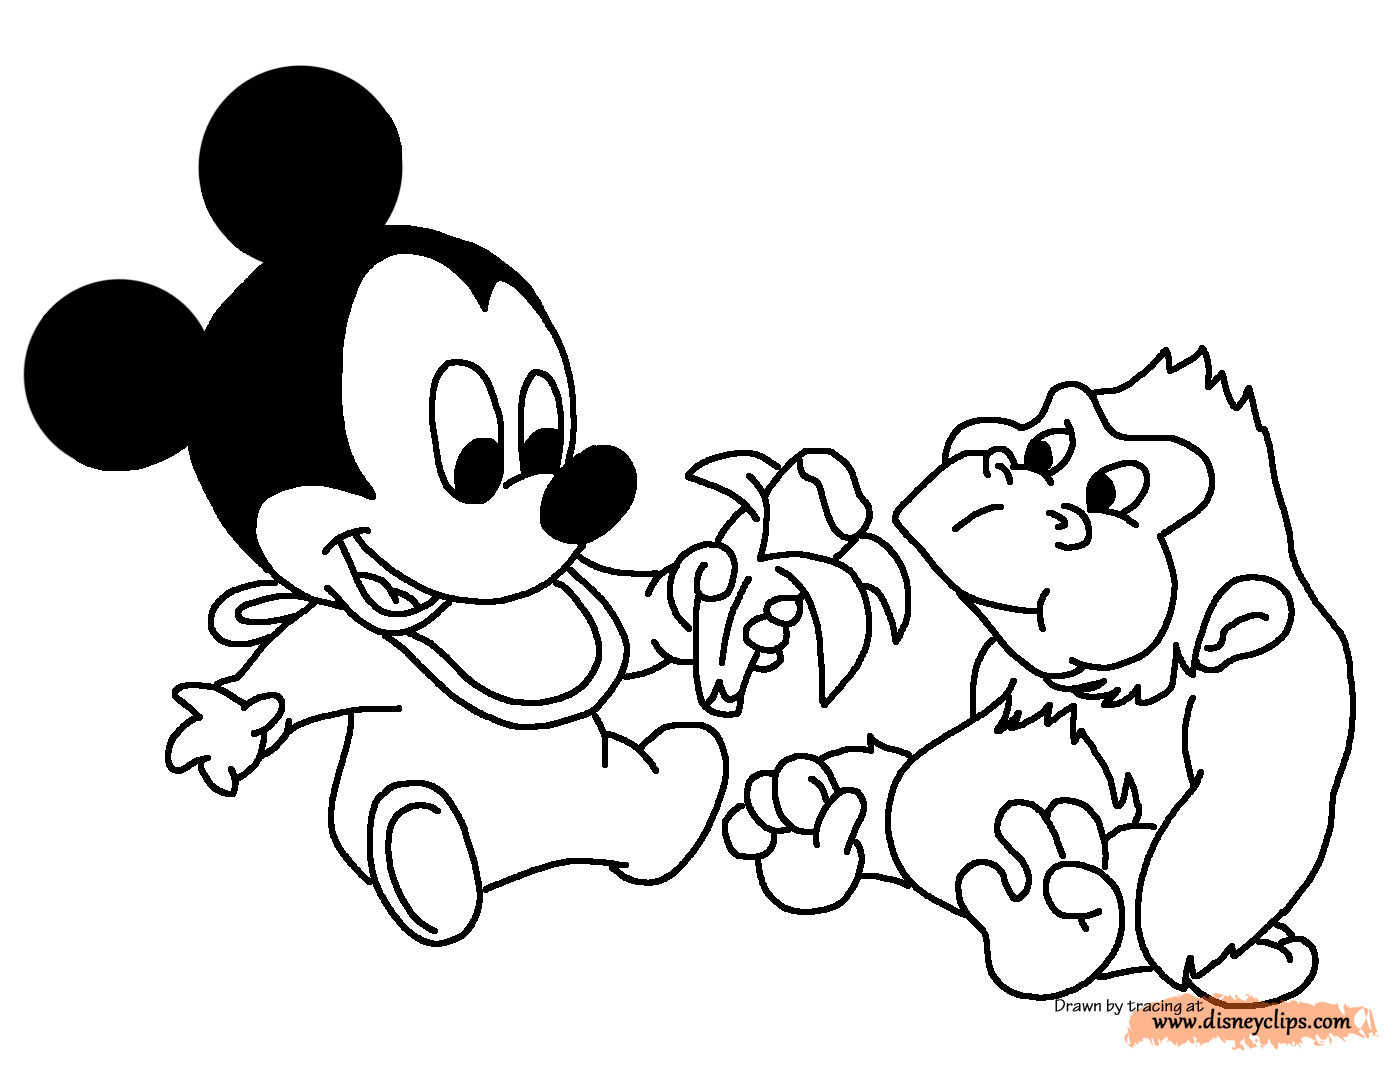 Disney Baby Characters Coloring Pages - Coloring Home